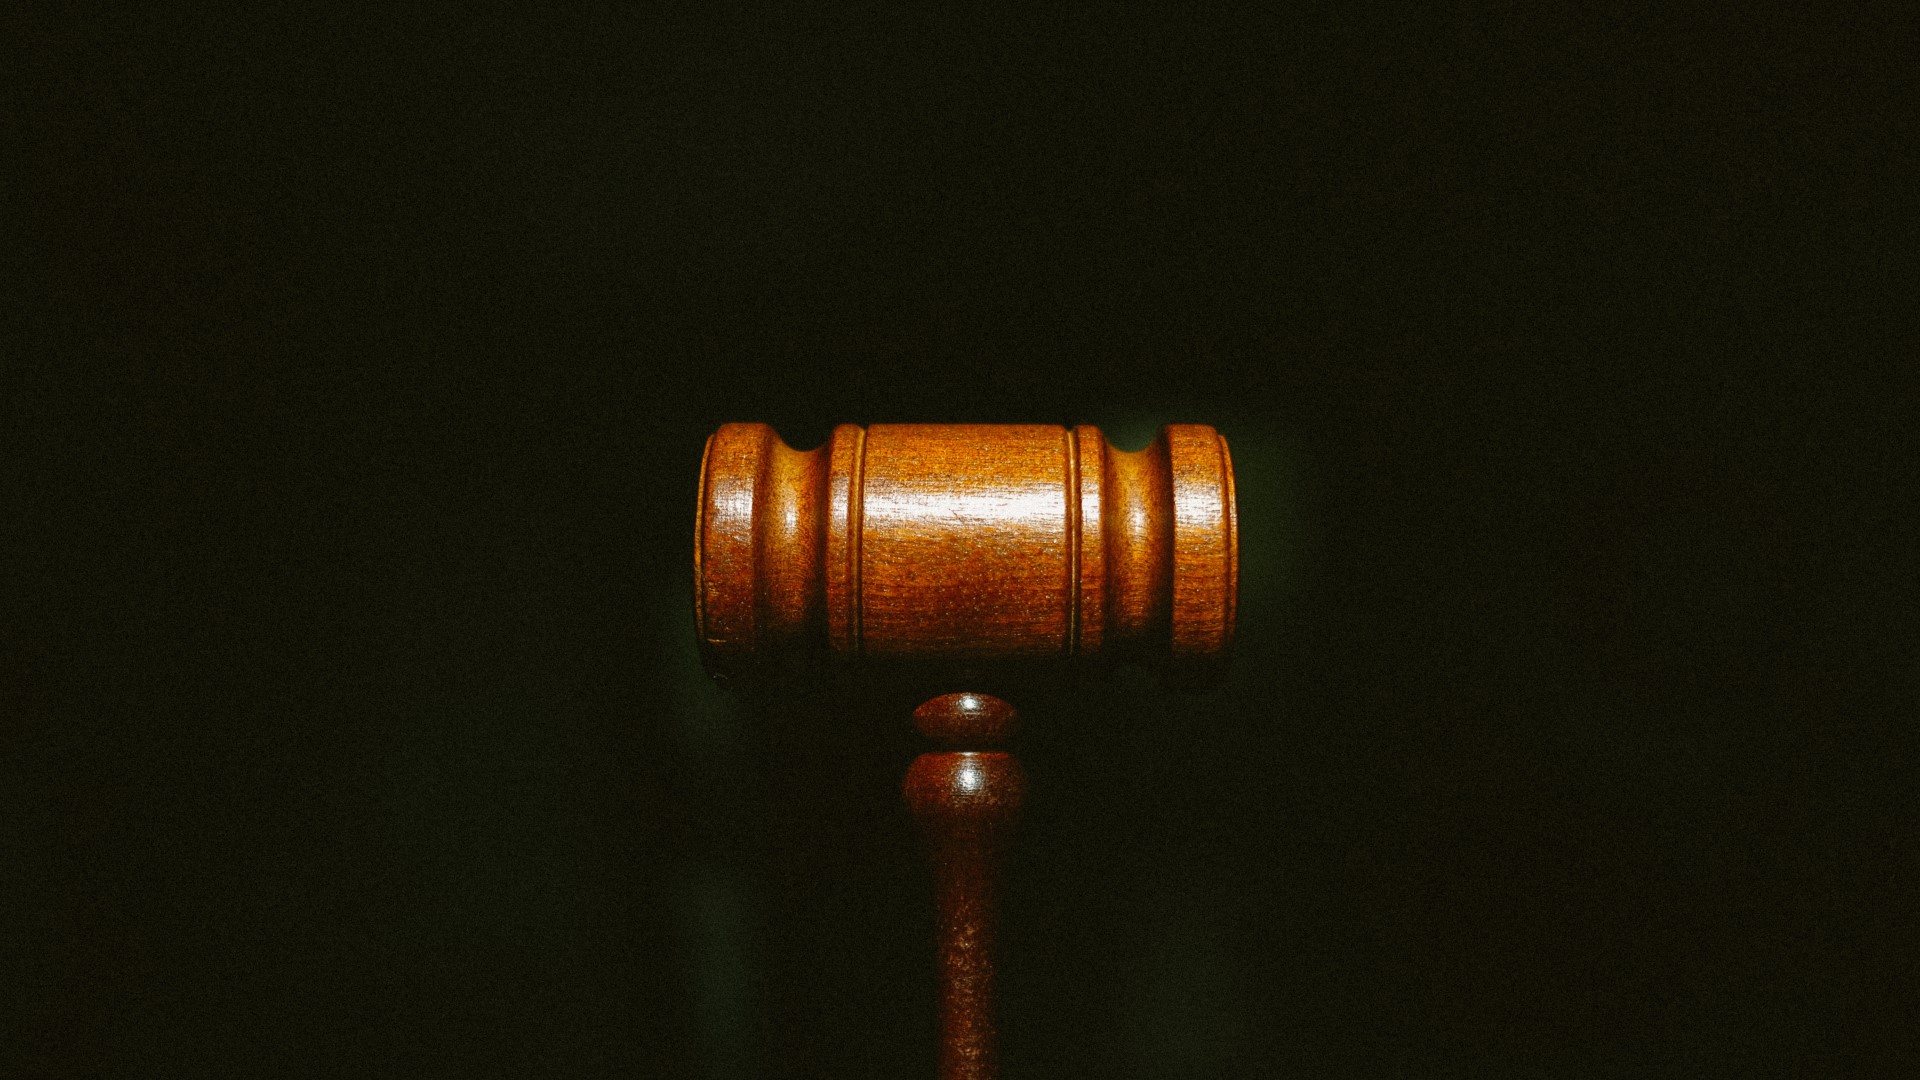 A brown wooden gavel against a black background.